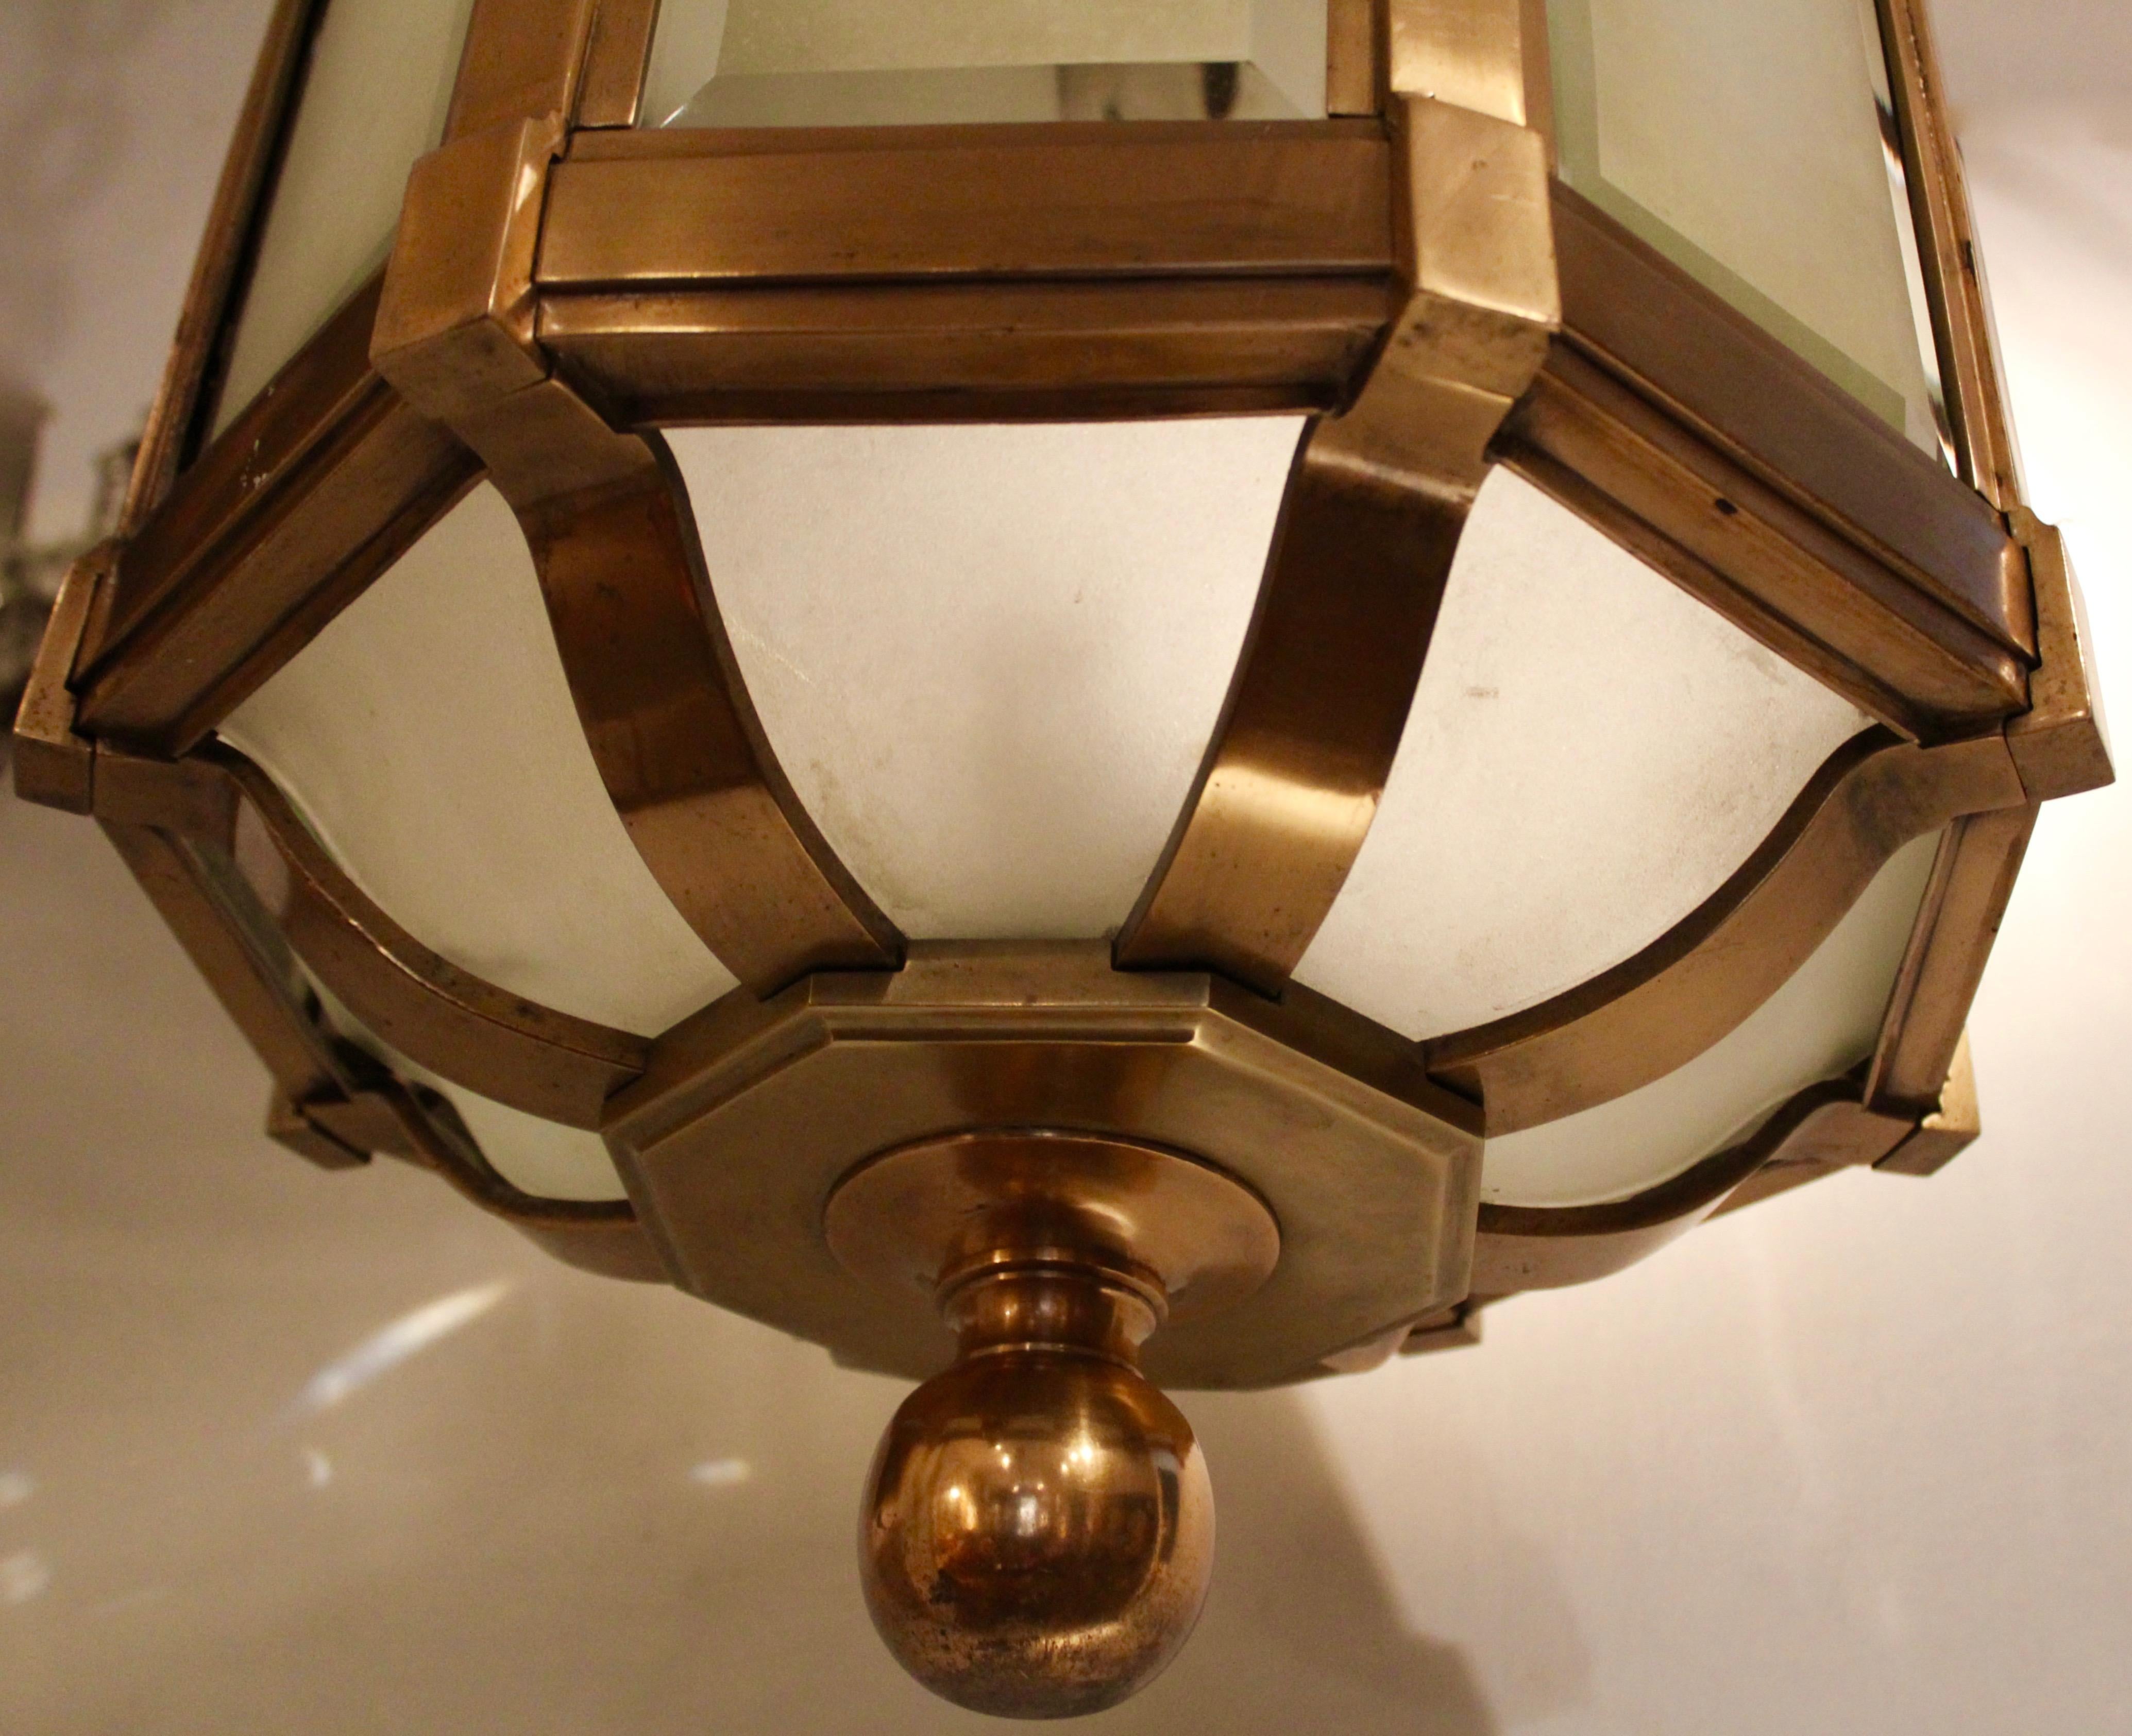 An Edwardian bronze and frosted glass hall lantern, circa 1910. The hexagonal lantern composed of bevelled frosted glass panes within a brass frame, terminating in a bronze knop. With original ceiling rose and chain, not wired.